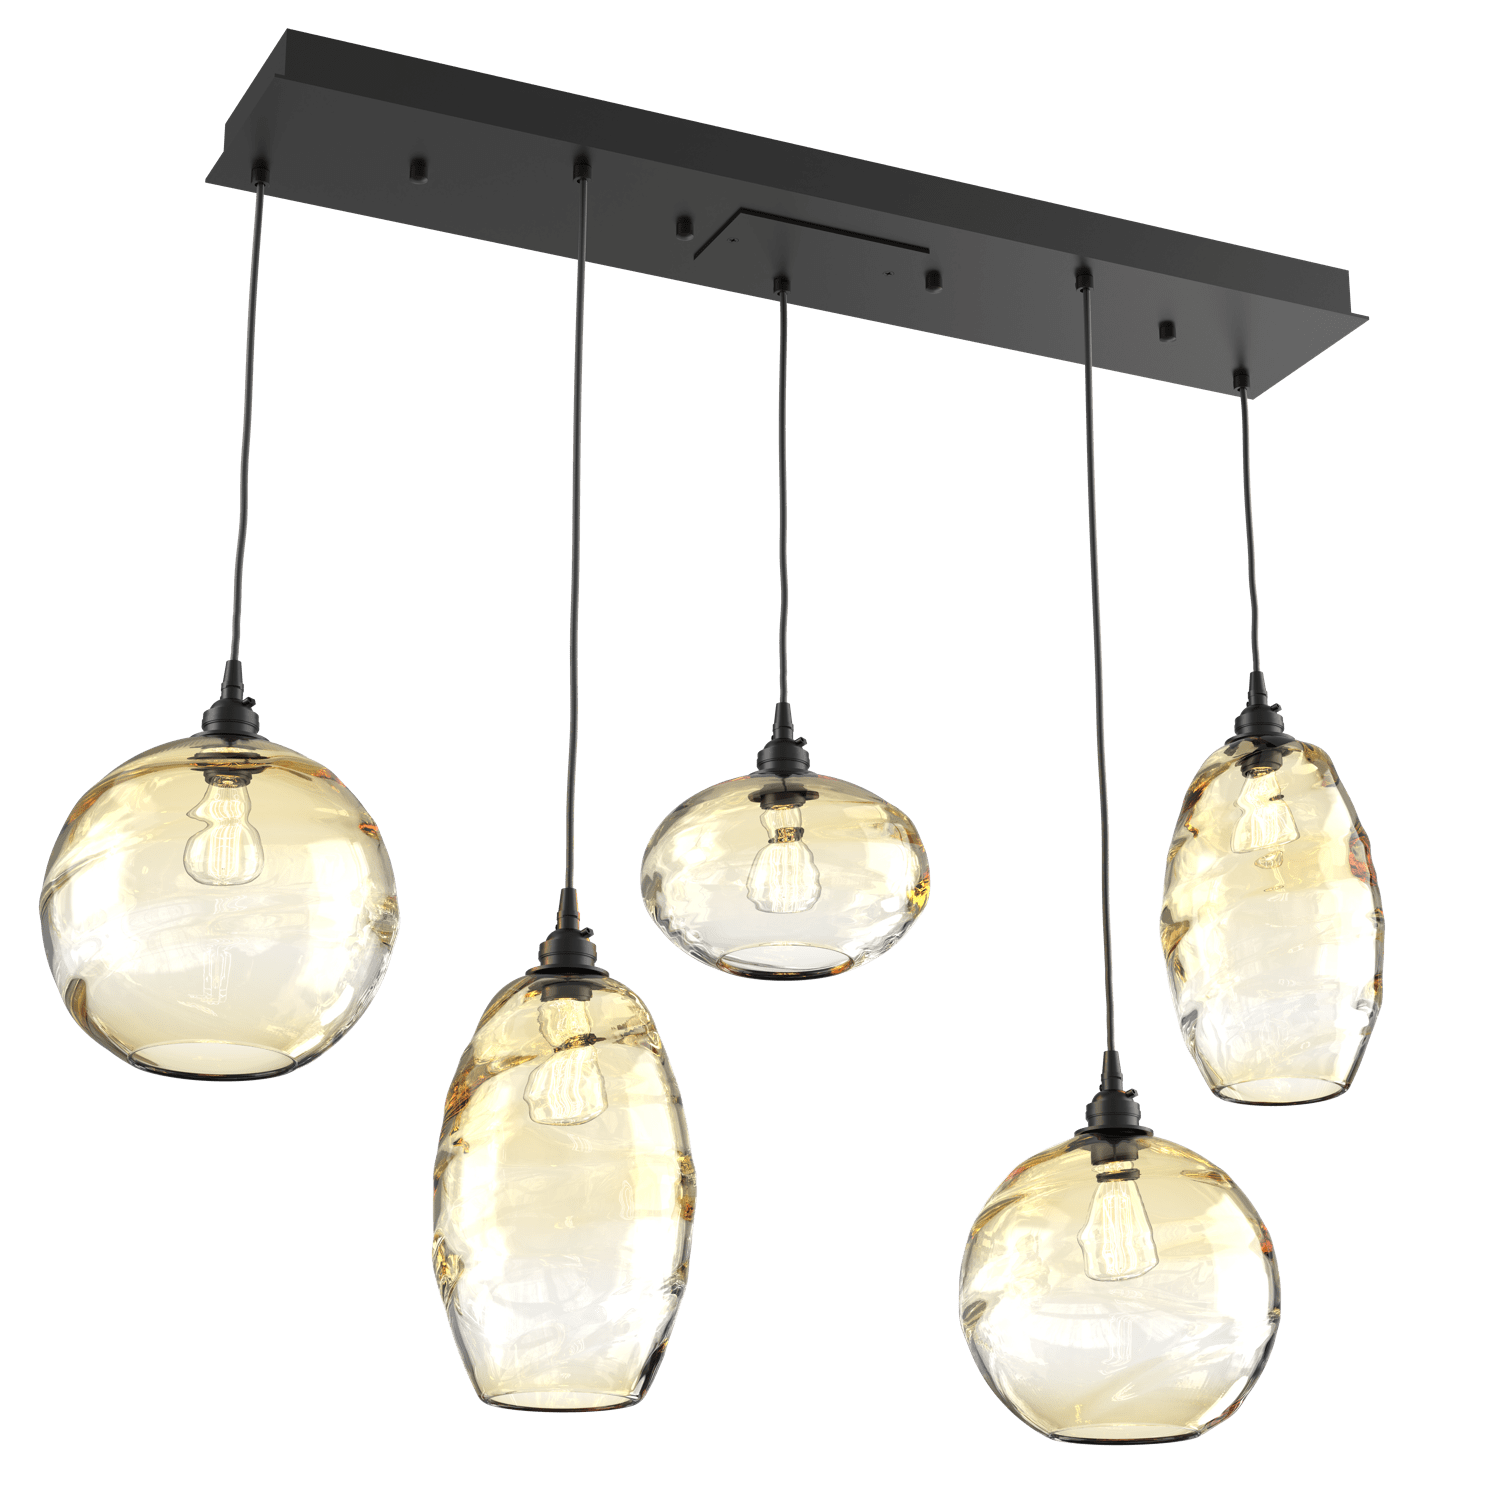 PLB0048-05-MB-OA-Hammerton-Studio-Optic-Blown-Glass-Misto-5-light-linear-pendant-chandelier-with-matte-black-finish-and-optic-amber-blown-glass-shades-and-incandescent-lamping